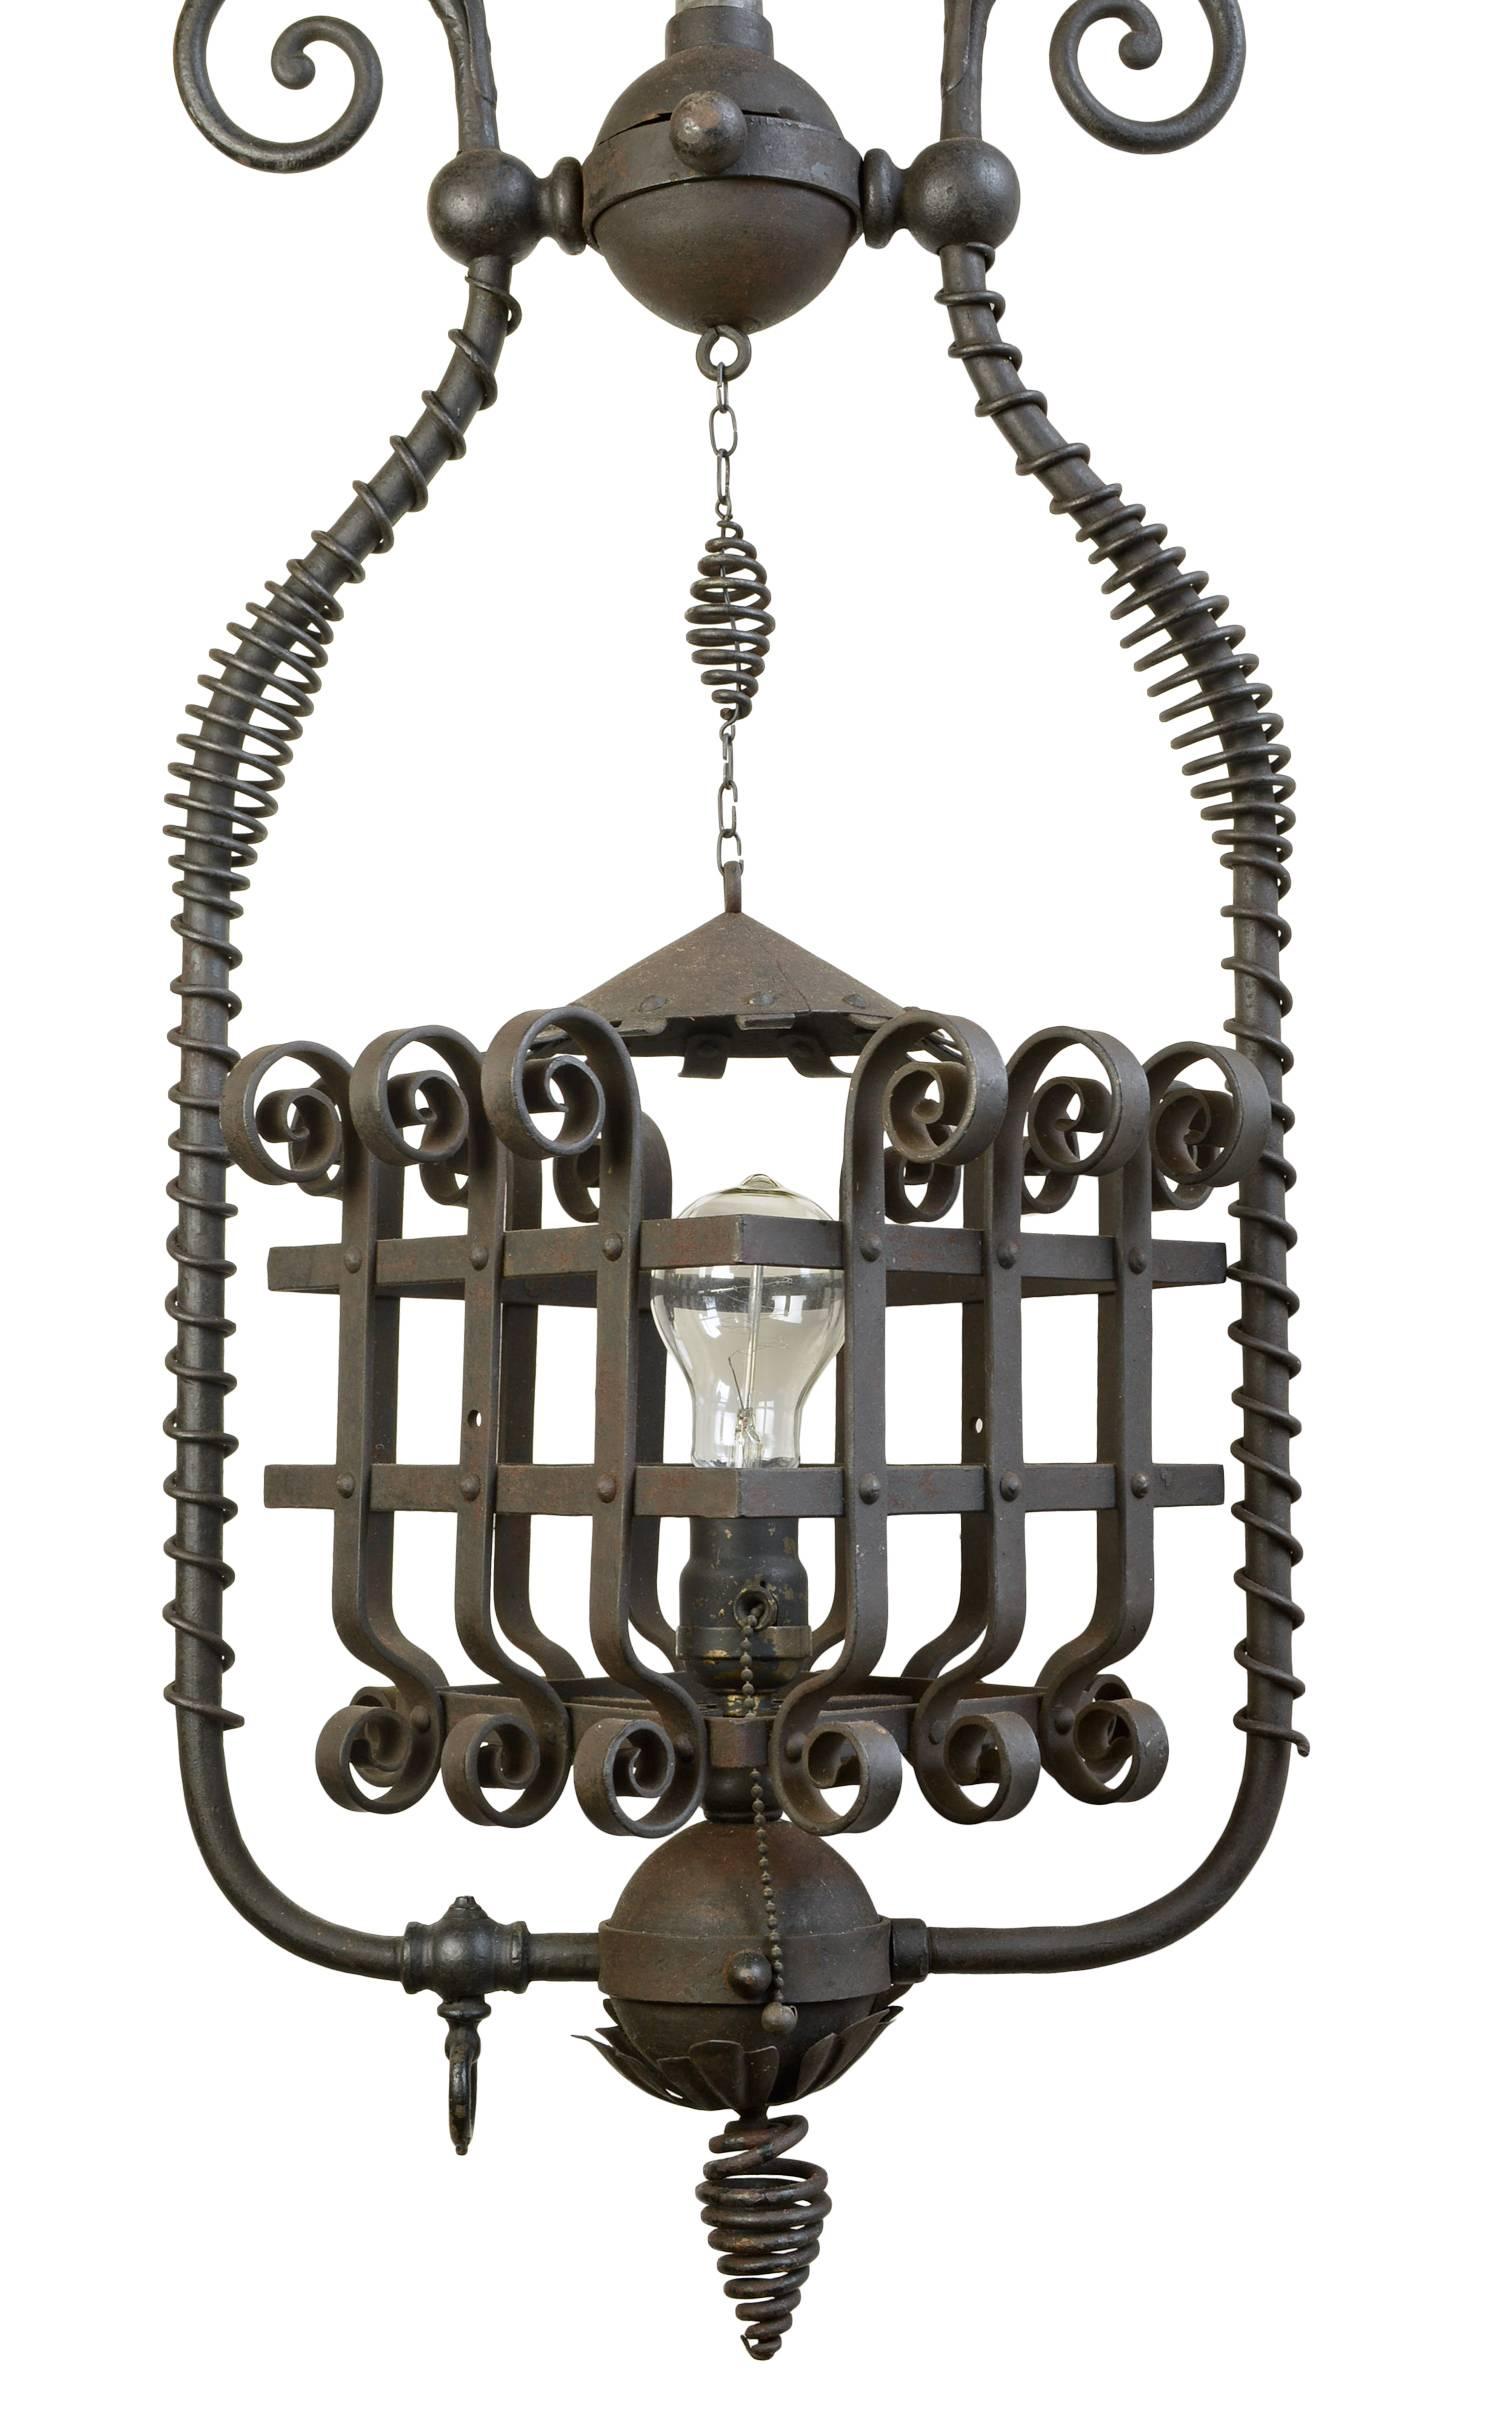 This unusual fixture contains fanciful scrolls that gracefully wrap around the harp, varying in diameter to give the fixture a feeling of whimsy and to emphasize its shape and line. Originally a gas lamp, it has been converted to an electric pendant